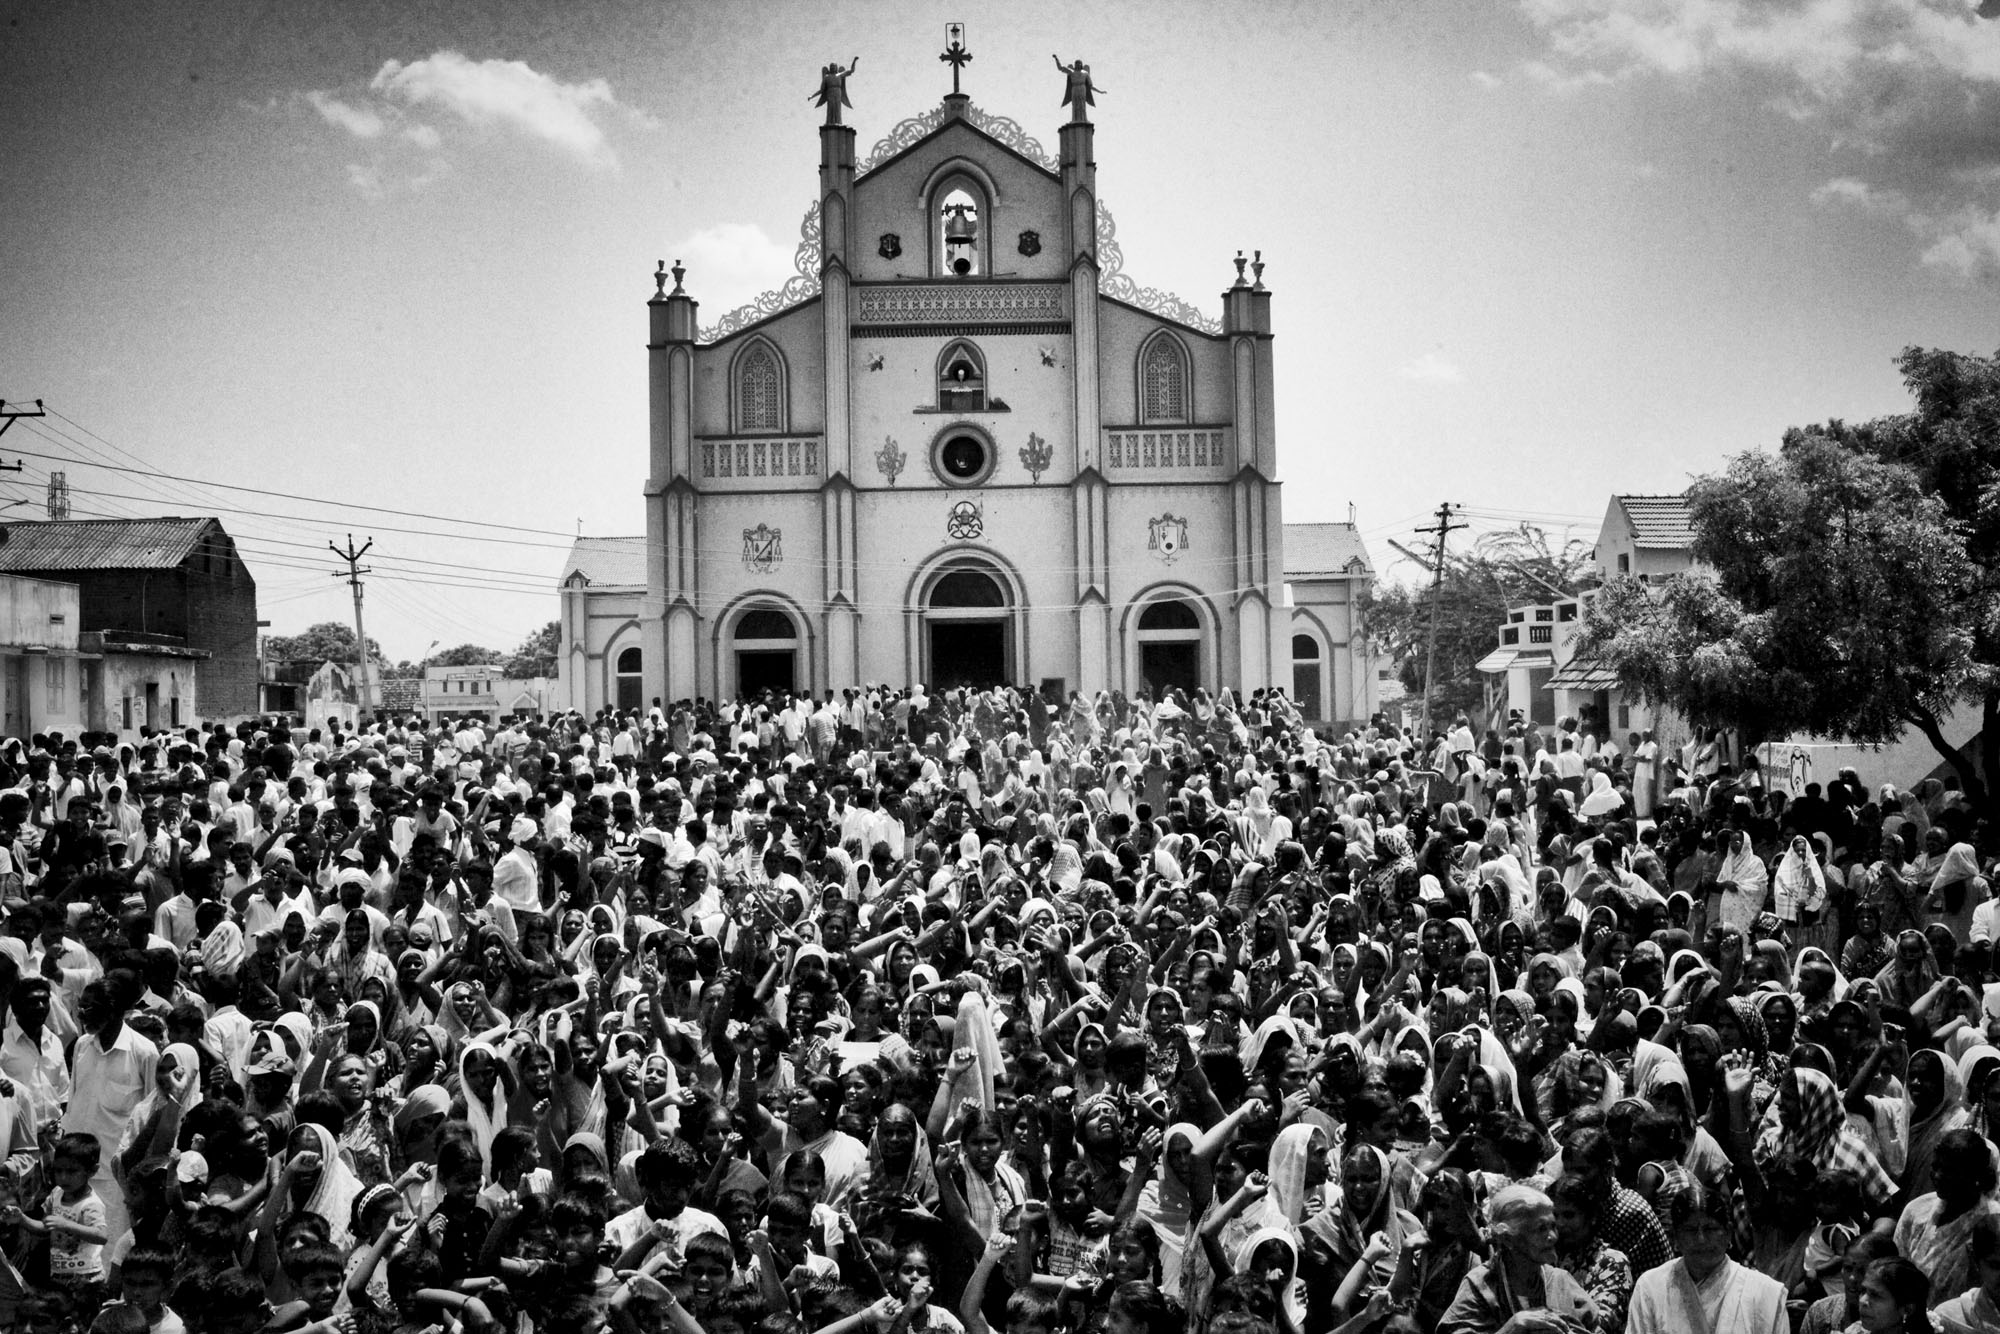 Villagers from Koothankuli, prevented from going to Idinthakarai by the imposition of a curfew, gather in front of the church and shout anti-government slogans.